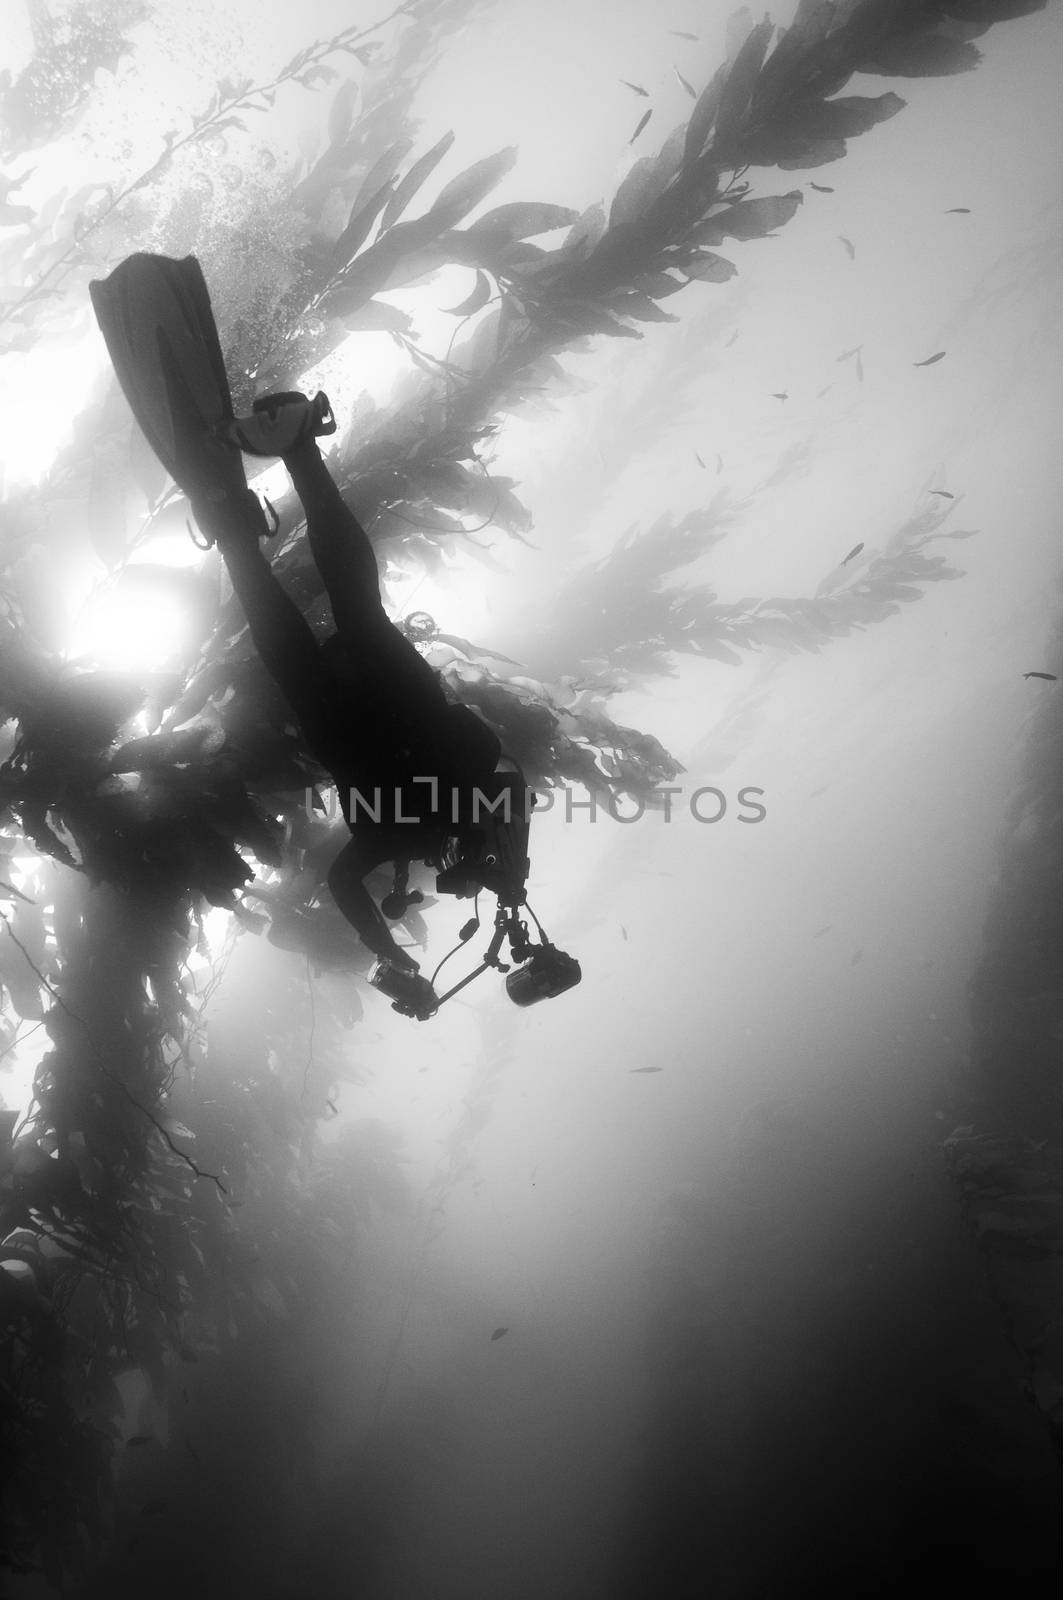 Underwater photographer  diving through kelp forest.  Unknown dive spot, Anacapa, Channel Islands, 34°00.92 N 119°22.51 W